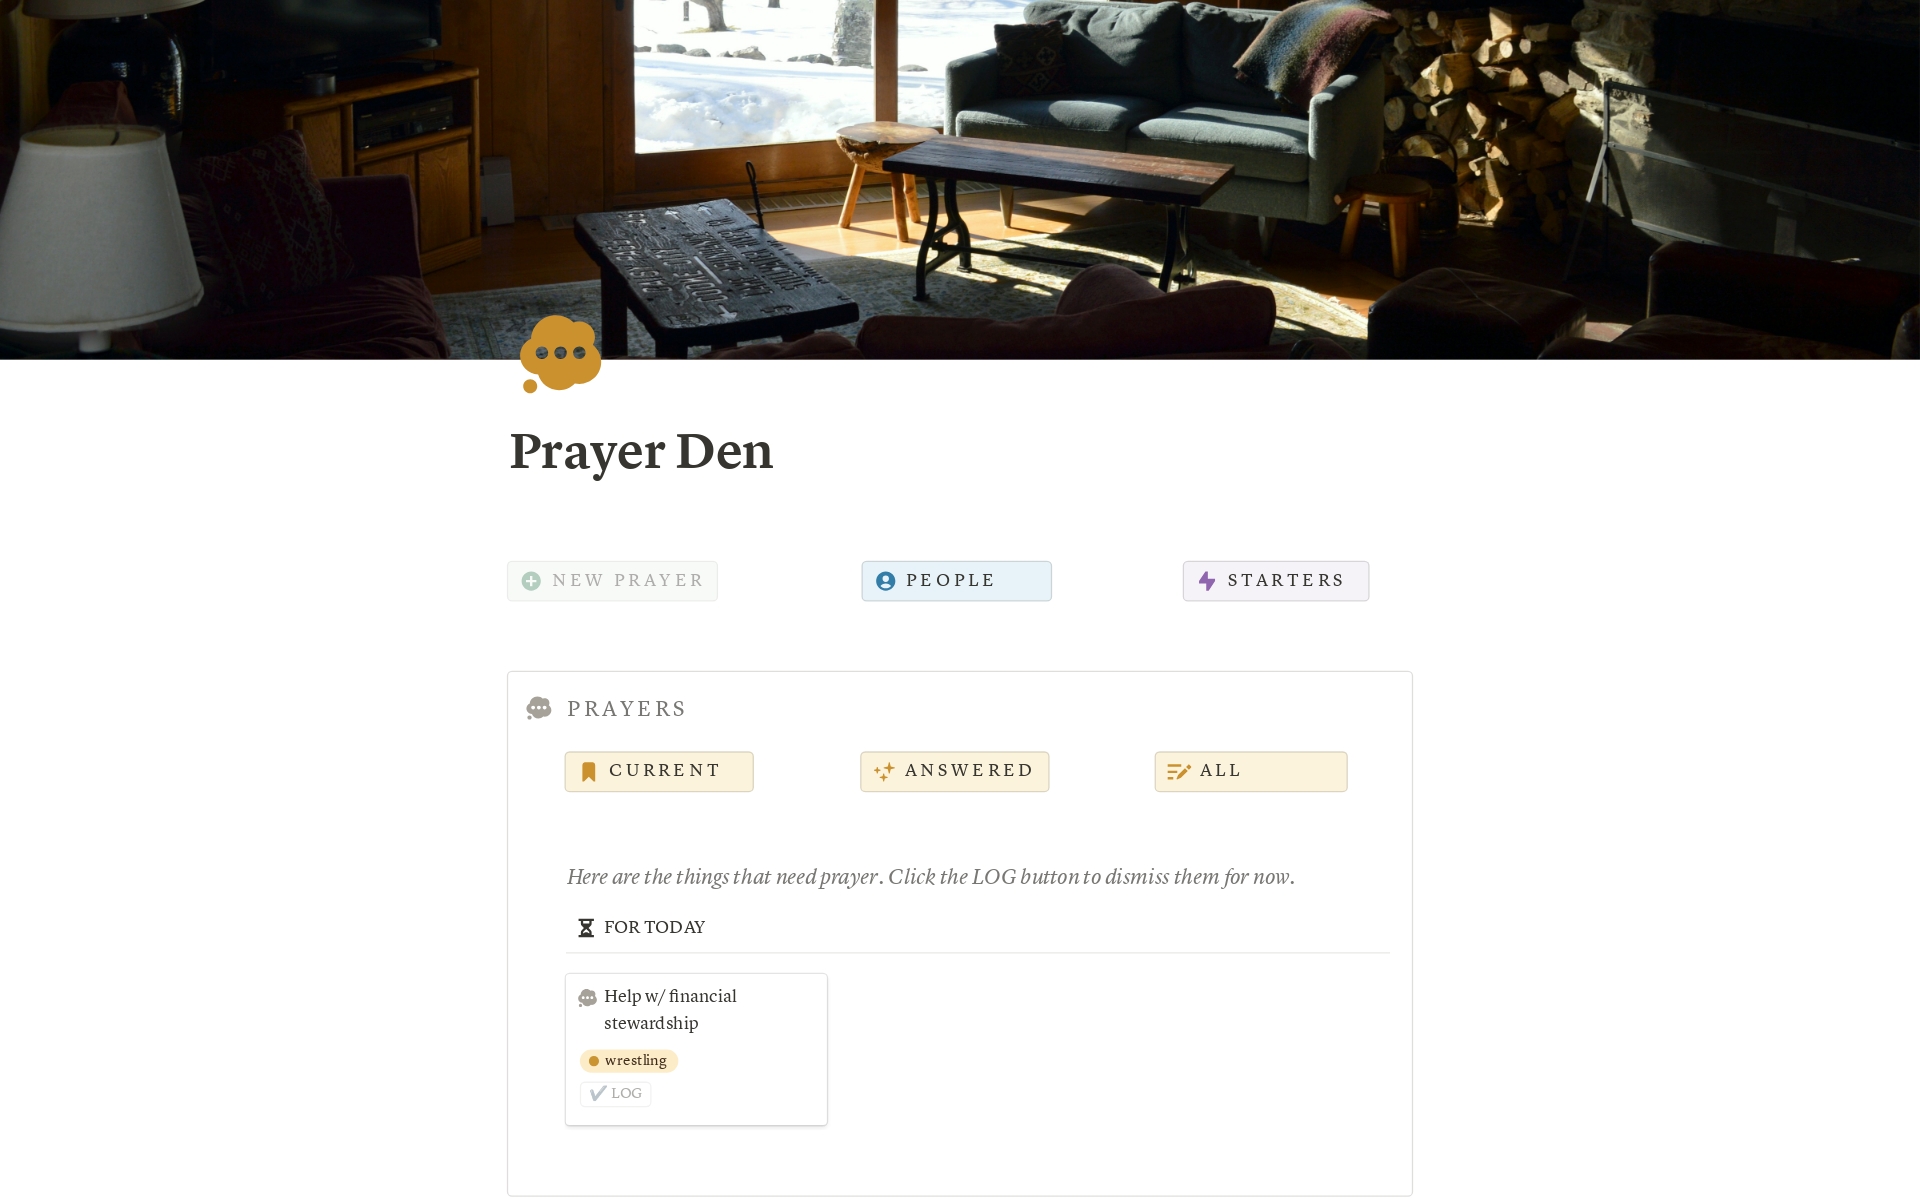 Want to become a prayer warrior? Use the power of Notion, with your own digital space for meeting with God and keeping track of what matters. Build a history of gratitude with a view for answered prayers. Connect prayers with people to form a simple, faith-centered CRM.